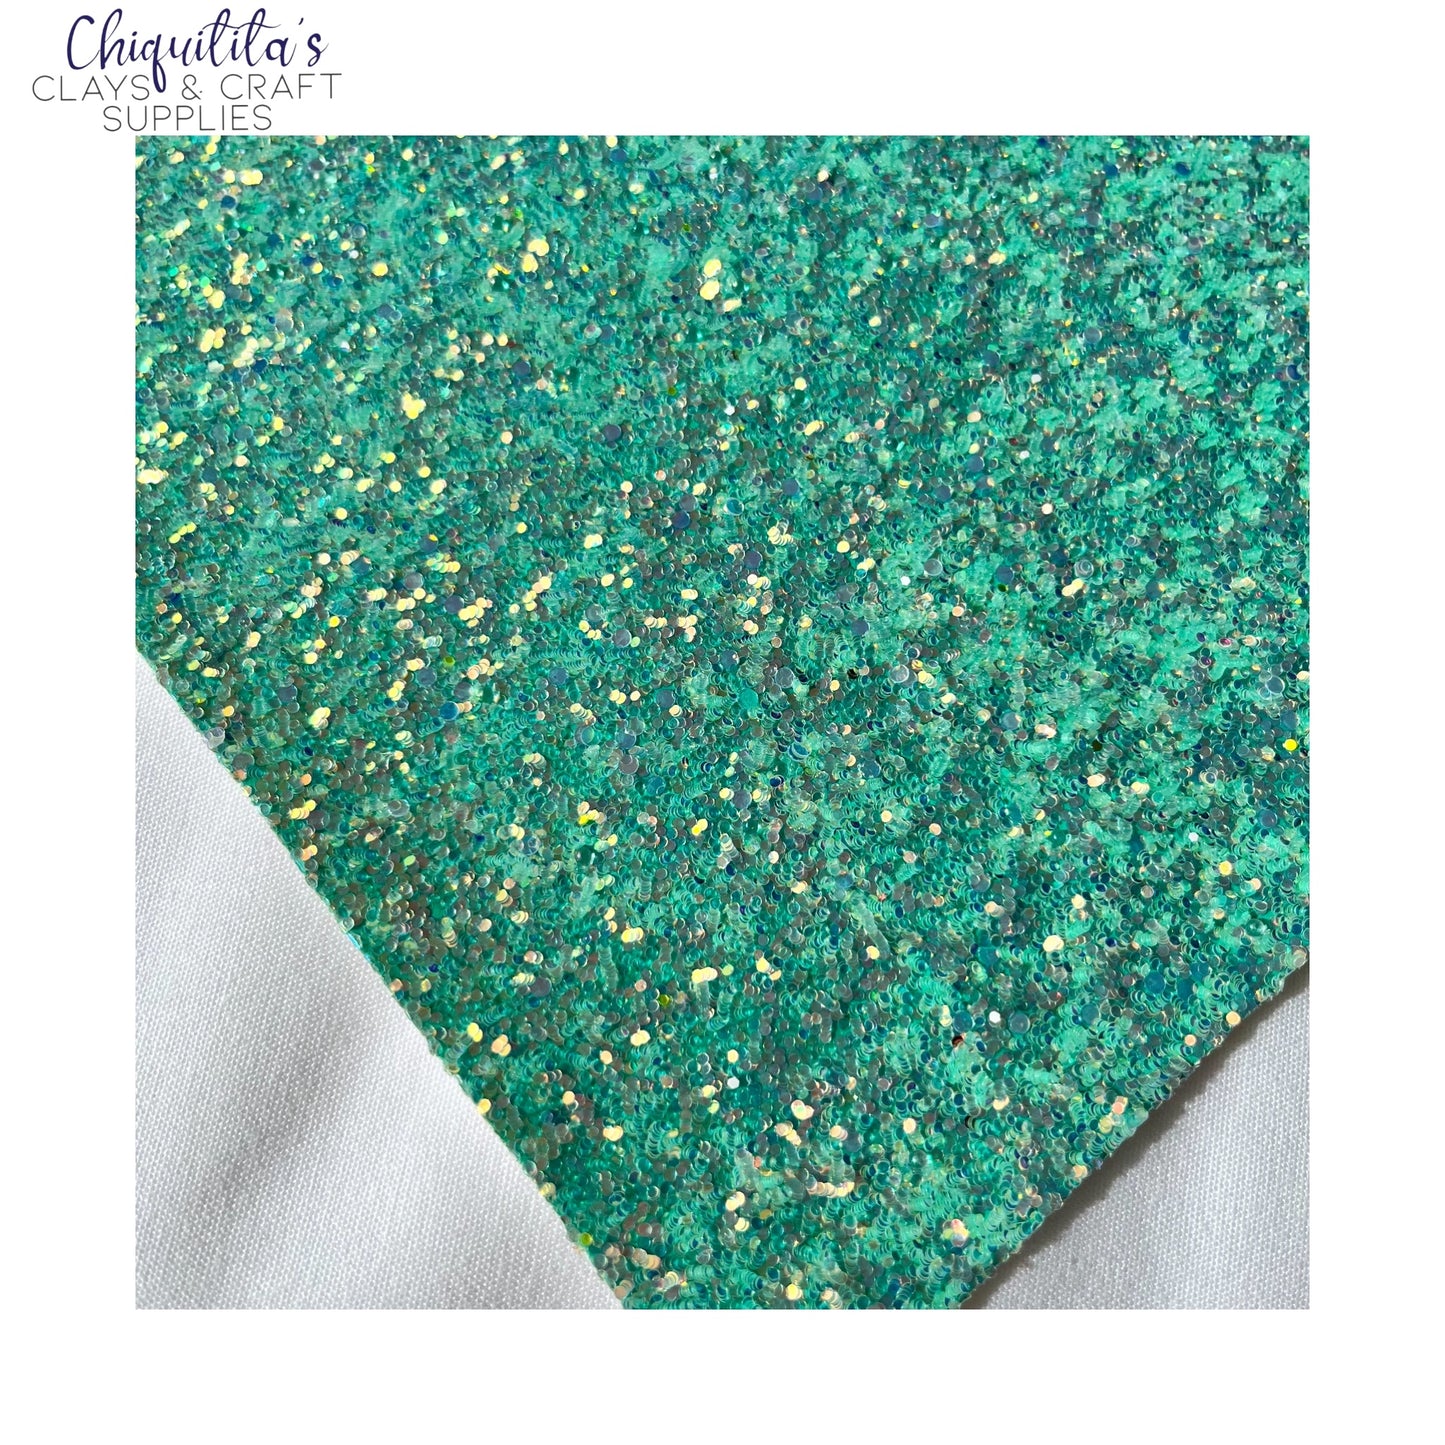 Bow Craft Supplies: Emerald Droplets Edition- Chunky Glitter Sheet